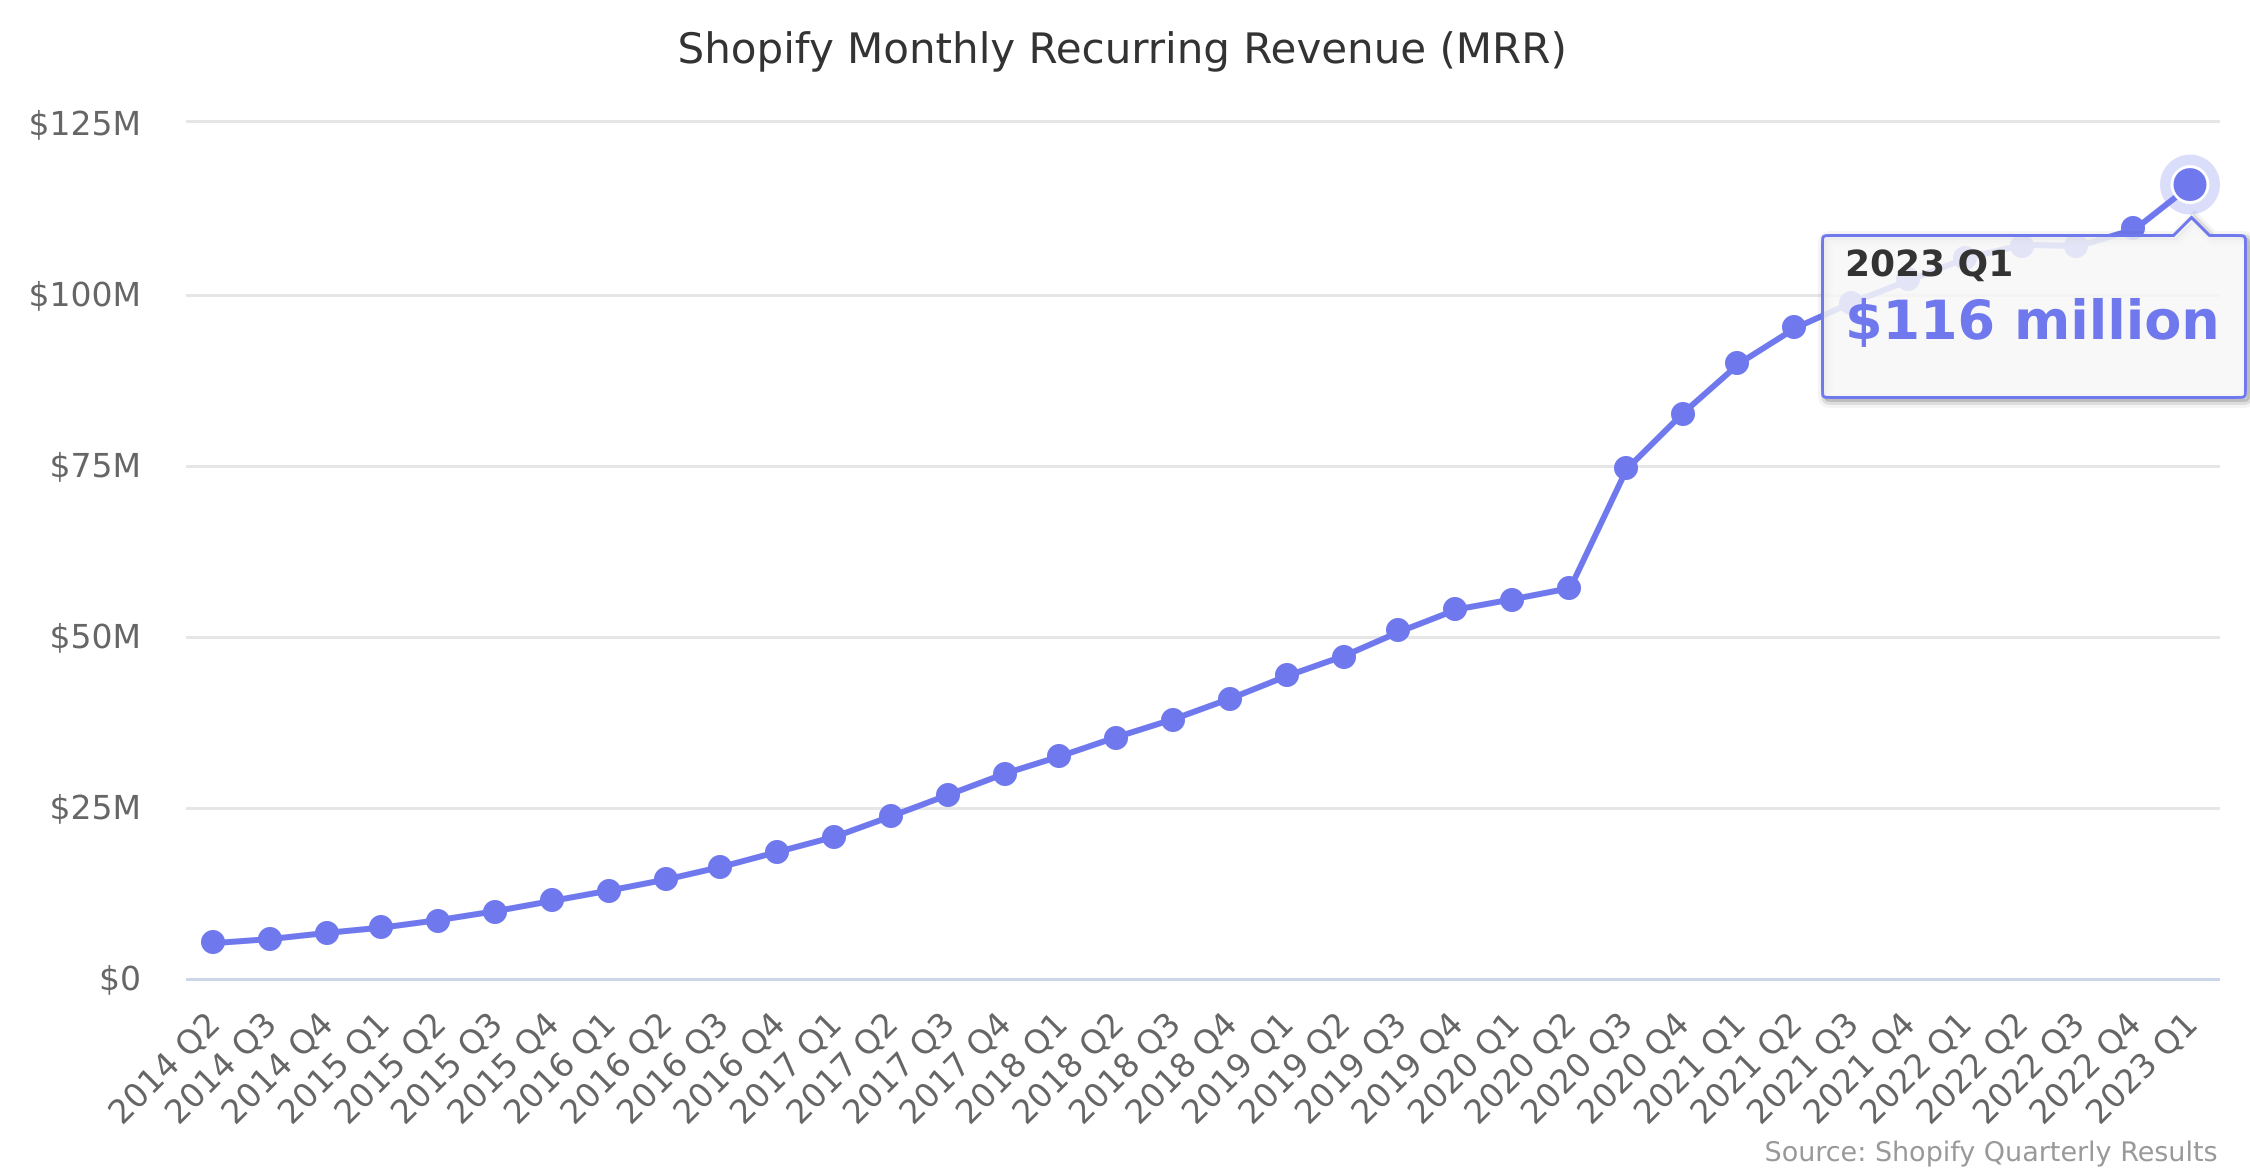 Shopify Monthly Recurring Revenue (MRR) 2014-2023